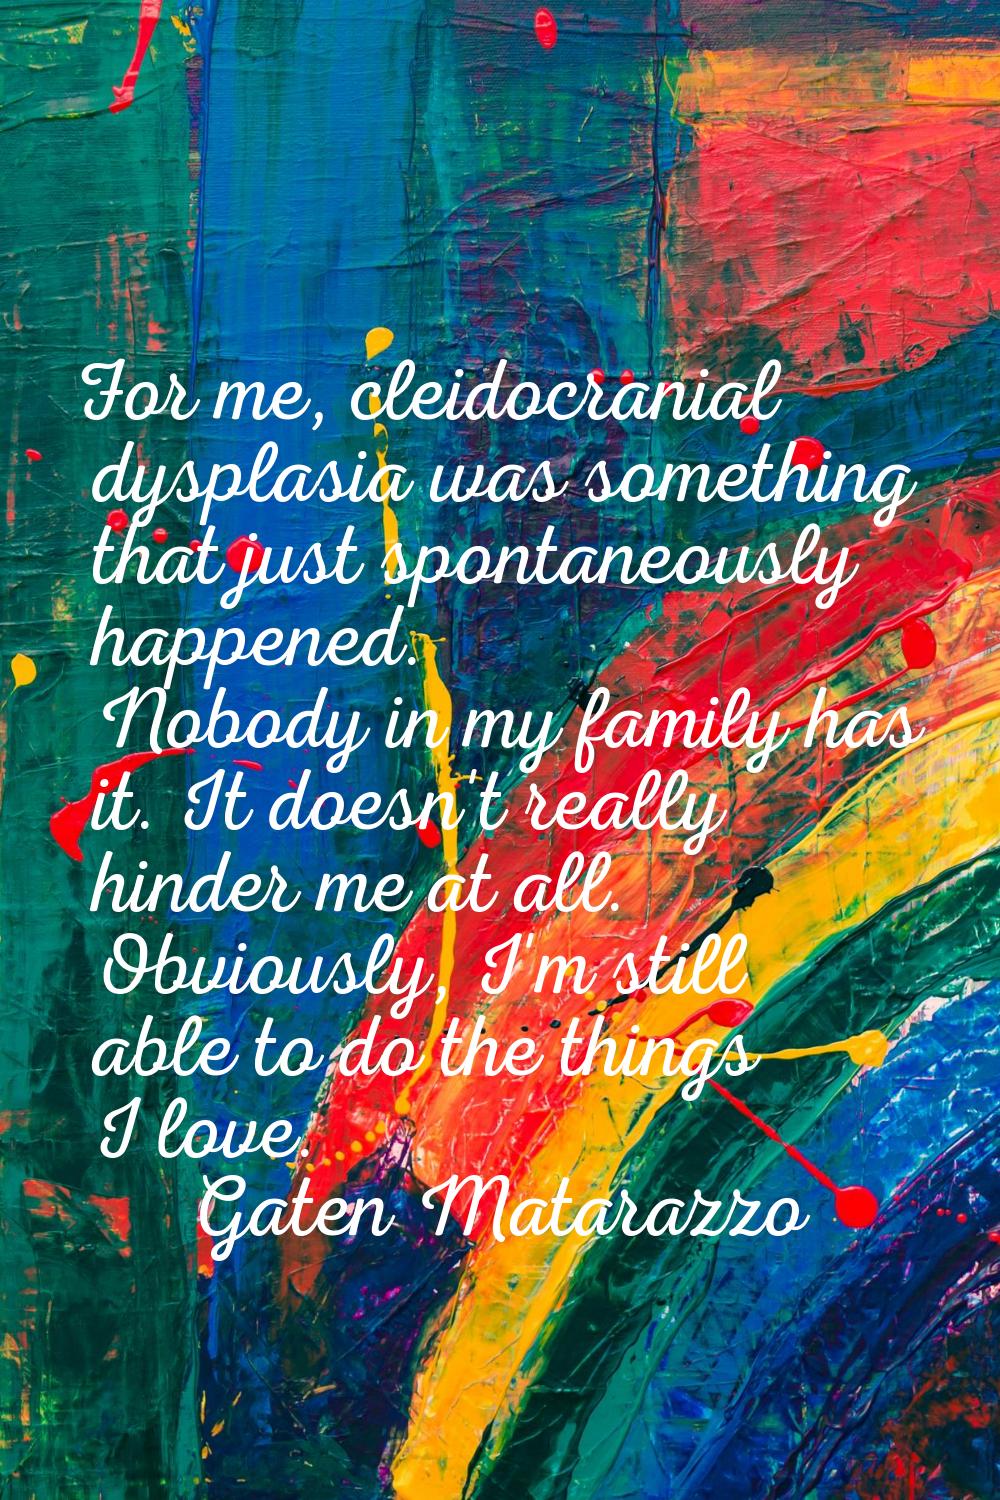 For me, cleidocranial dysplasia was something that just spontaneously happened. Nobody in my family